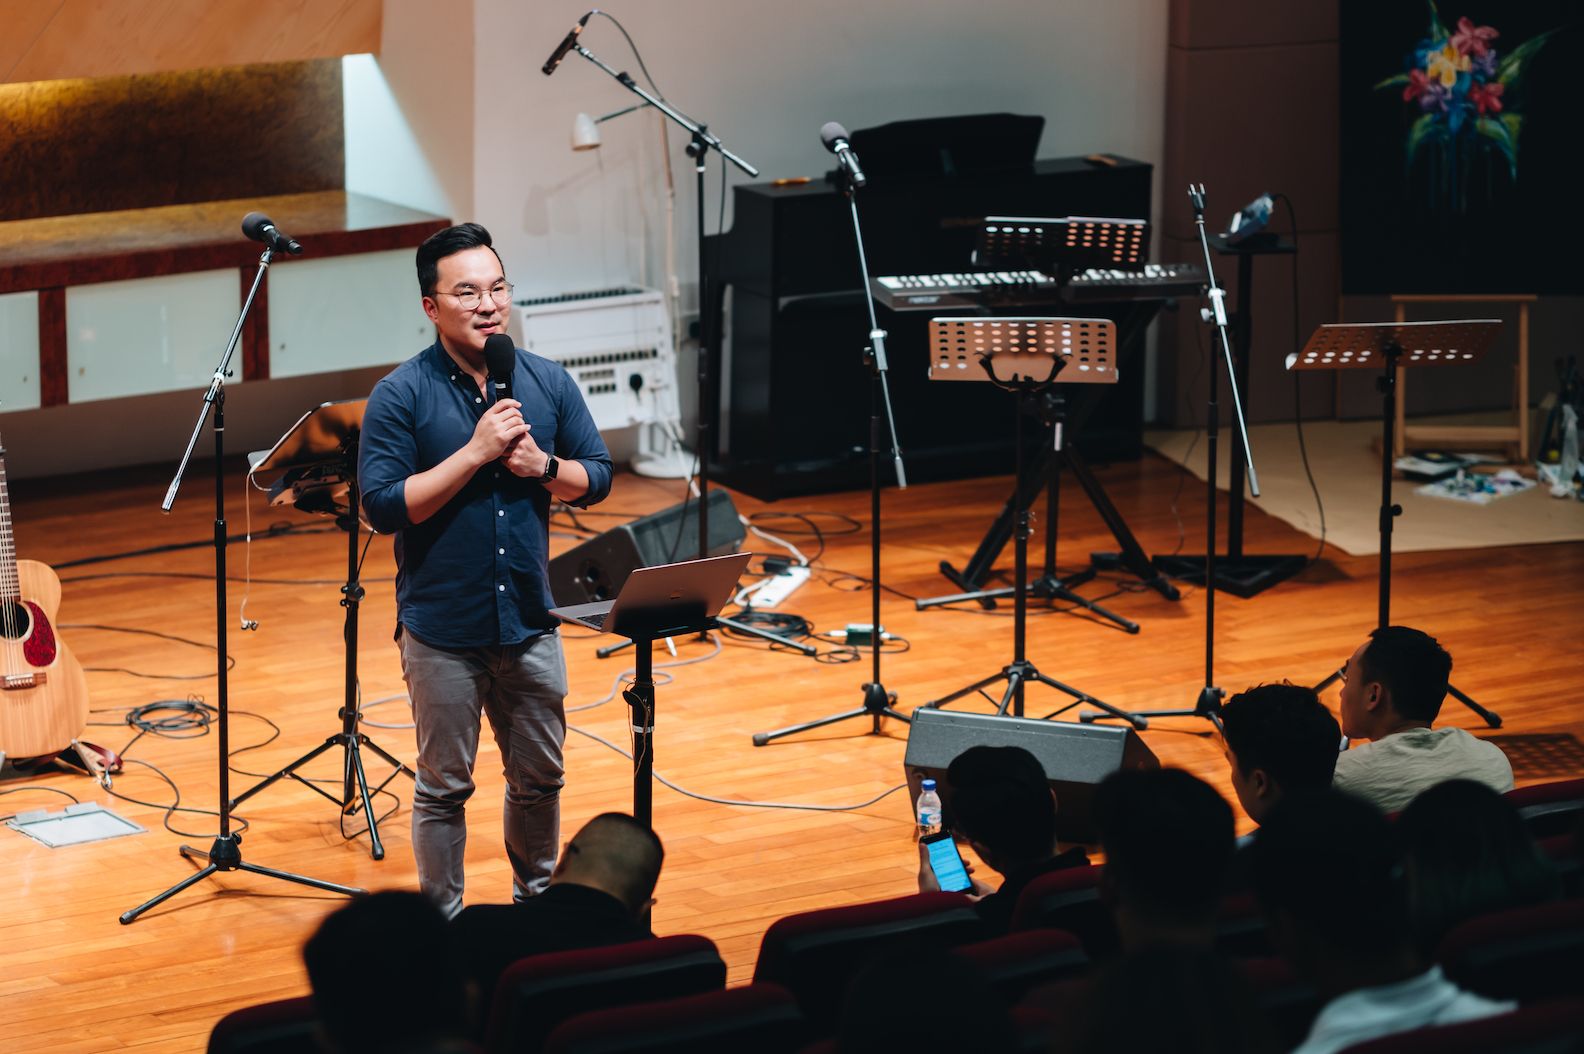 Josh Yeoh speaks to young people